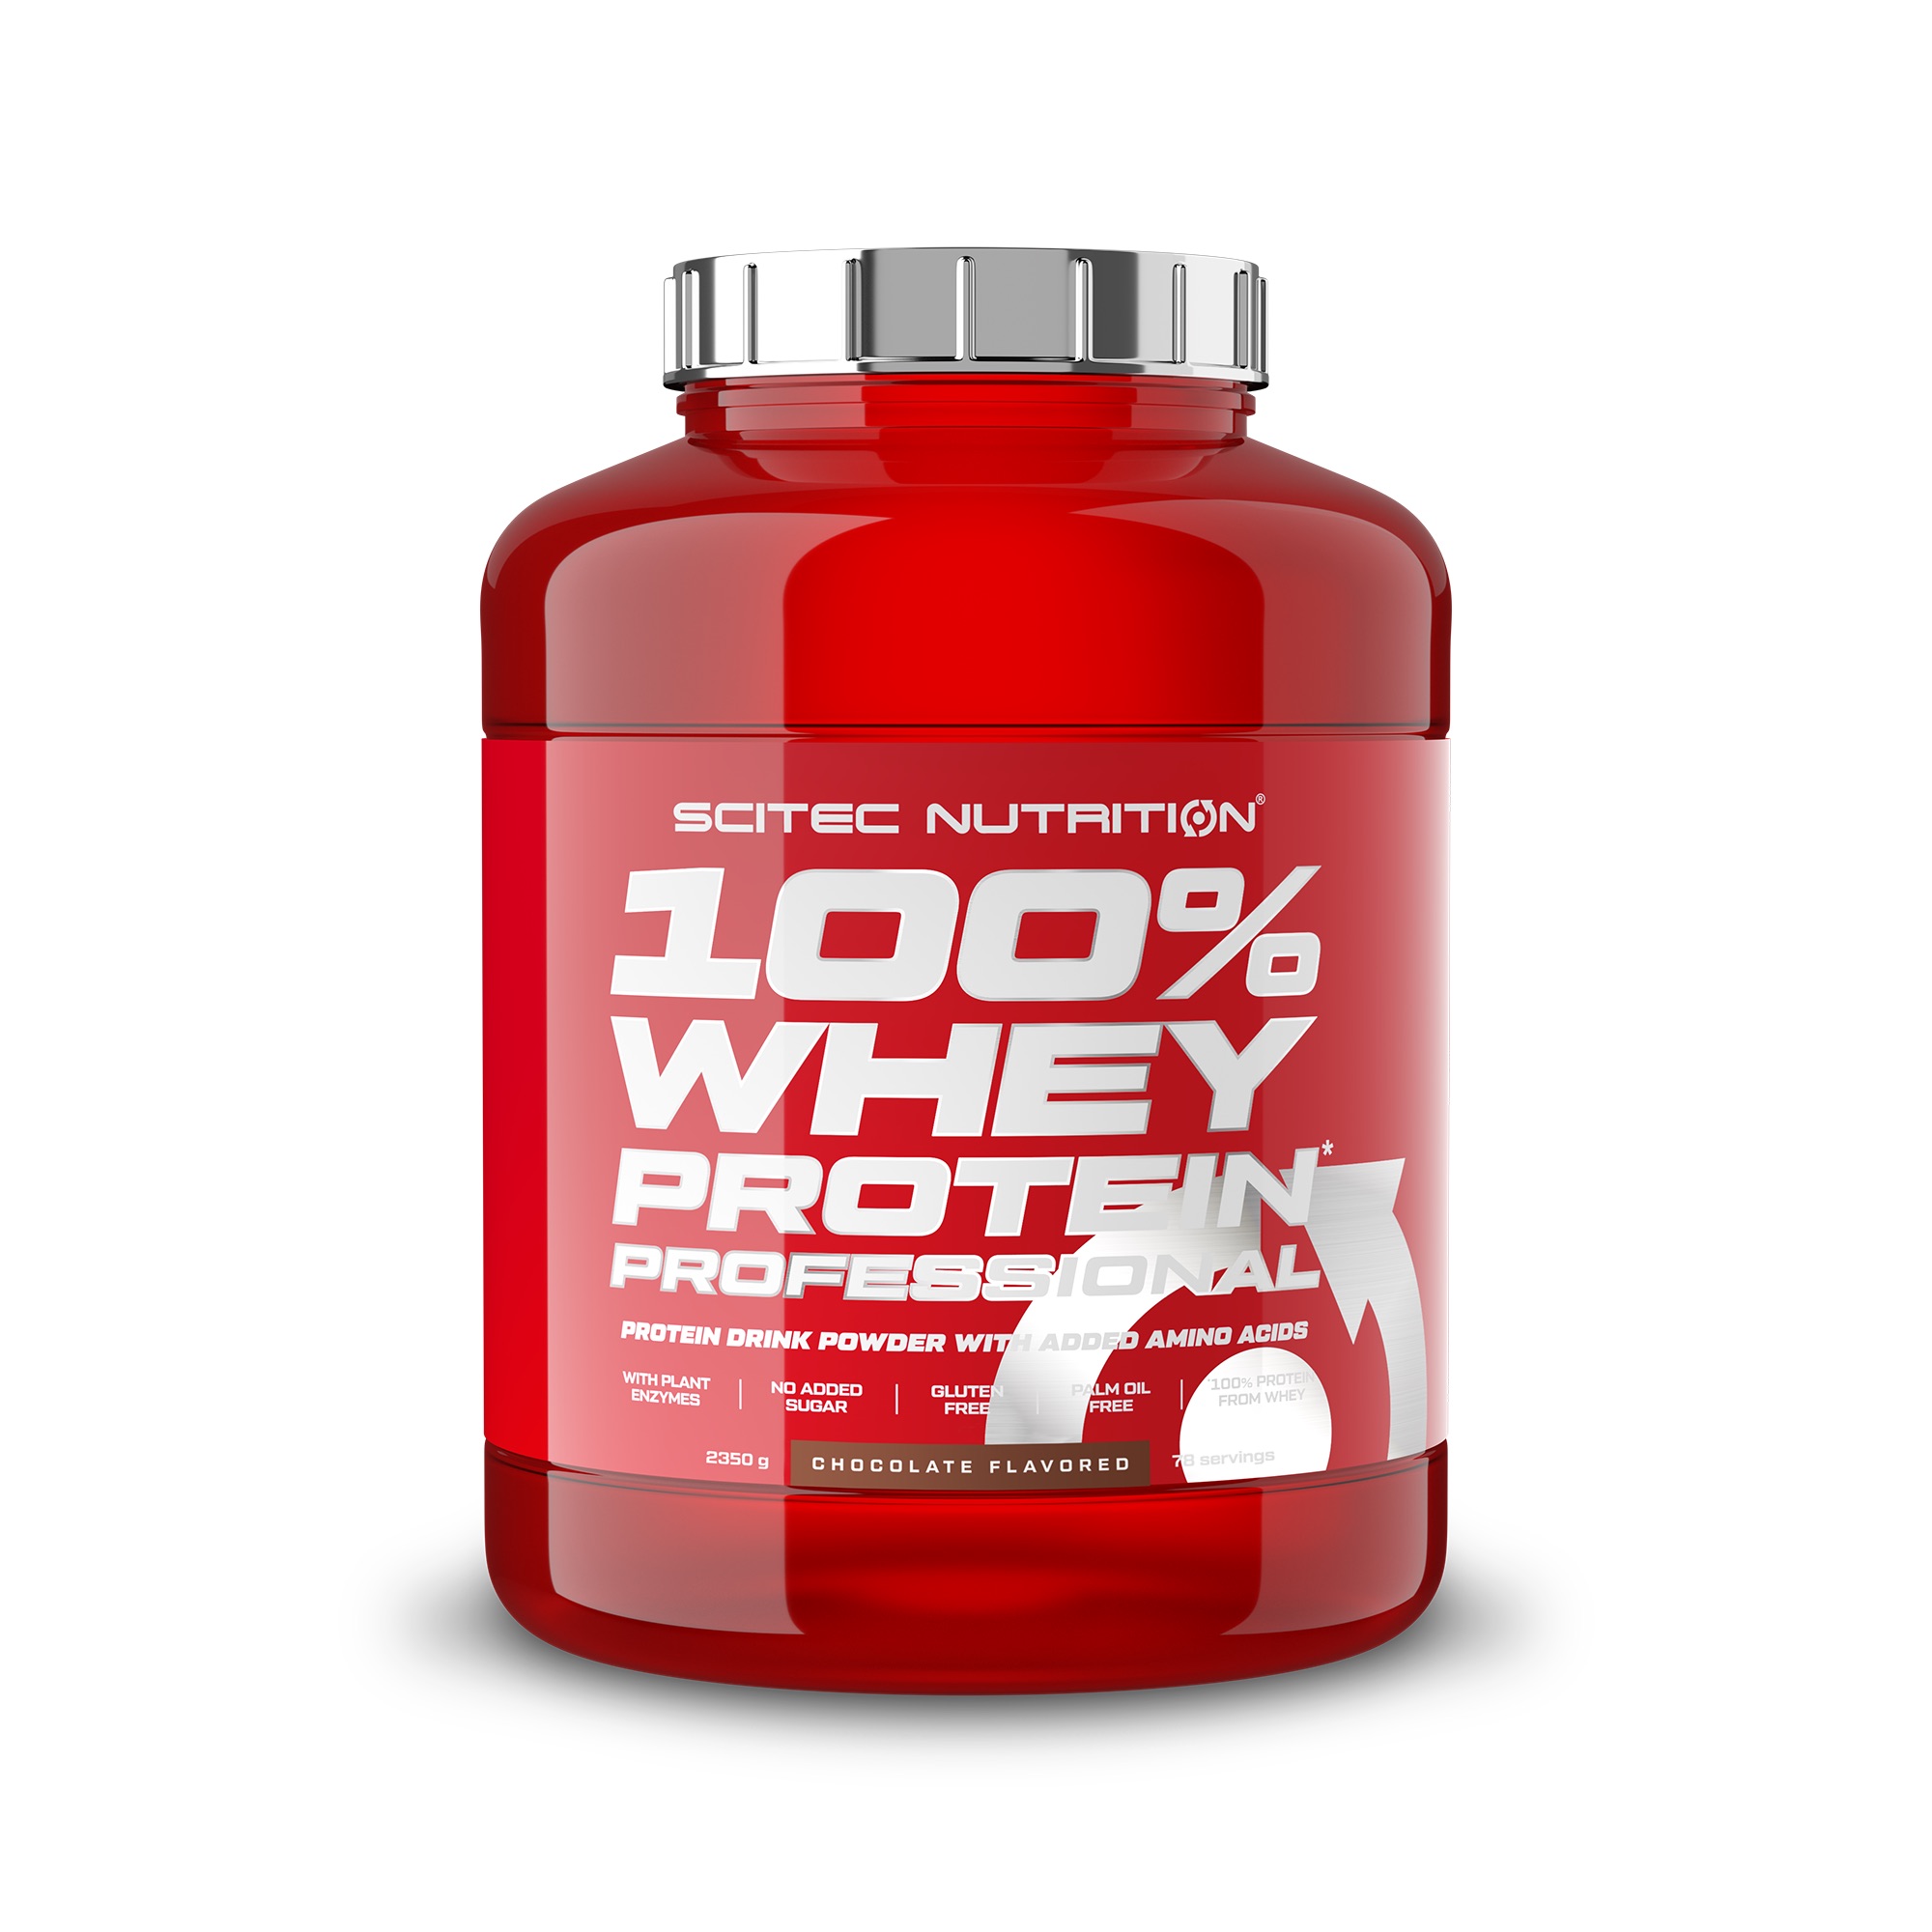 100% Whey Protein Professional 2.350 grs. Chocolate